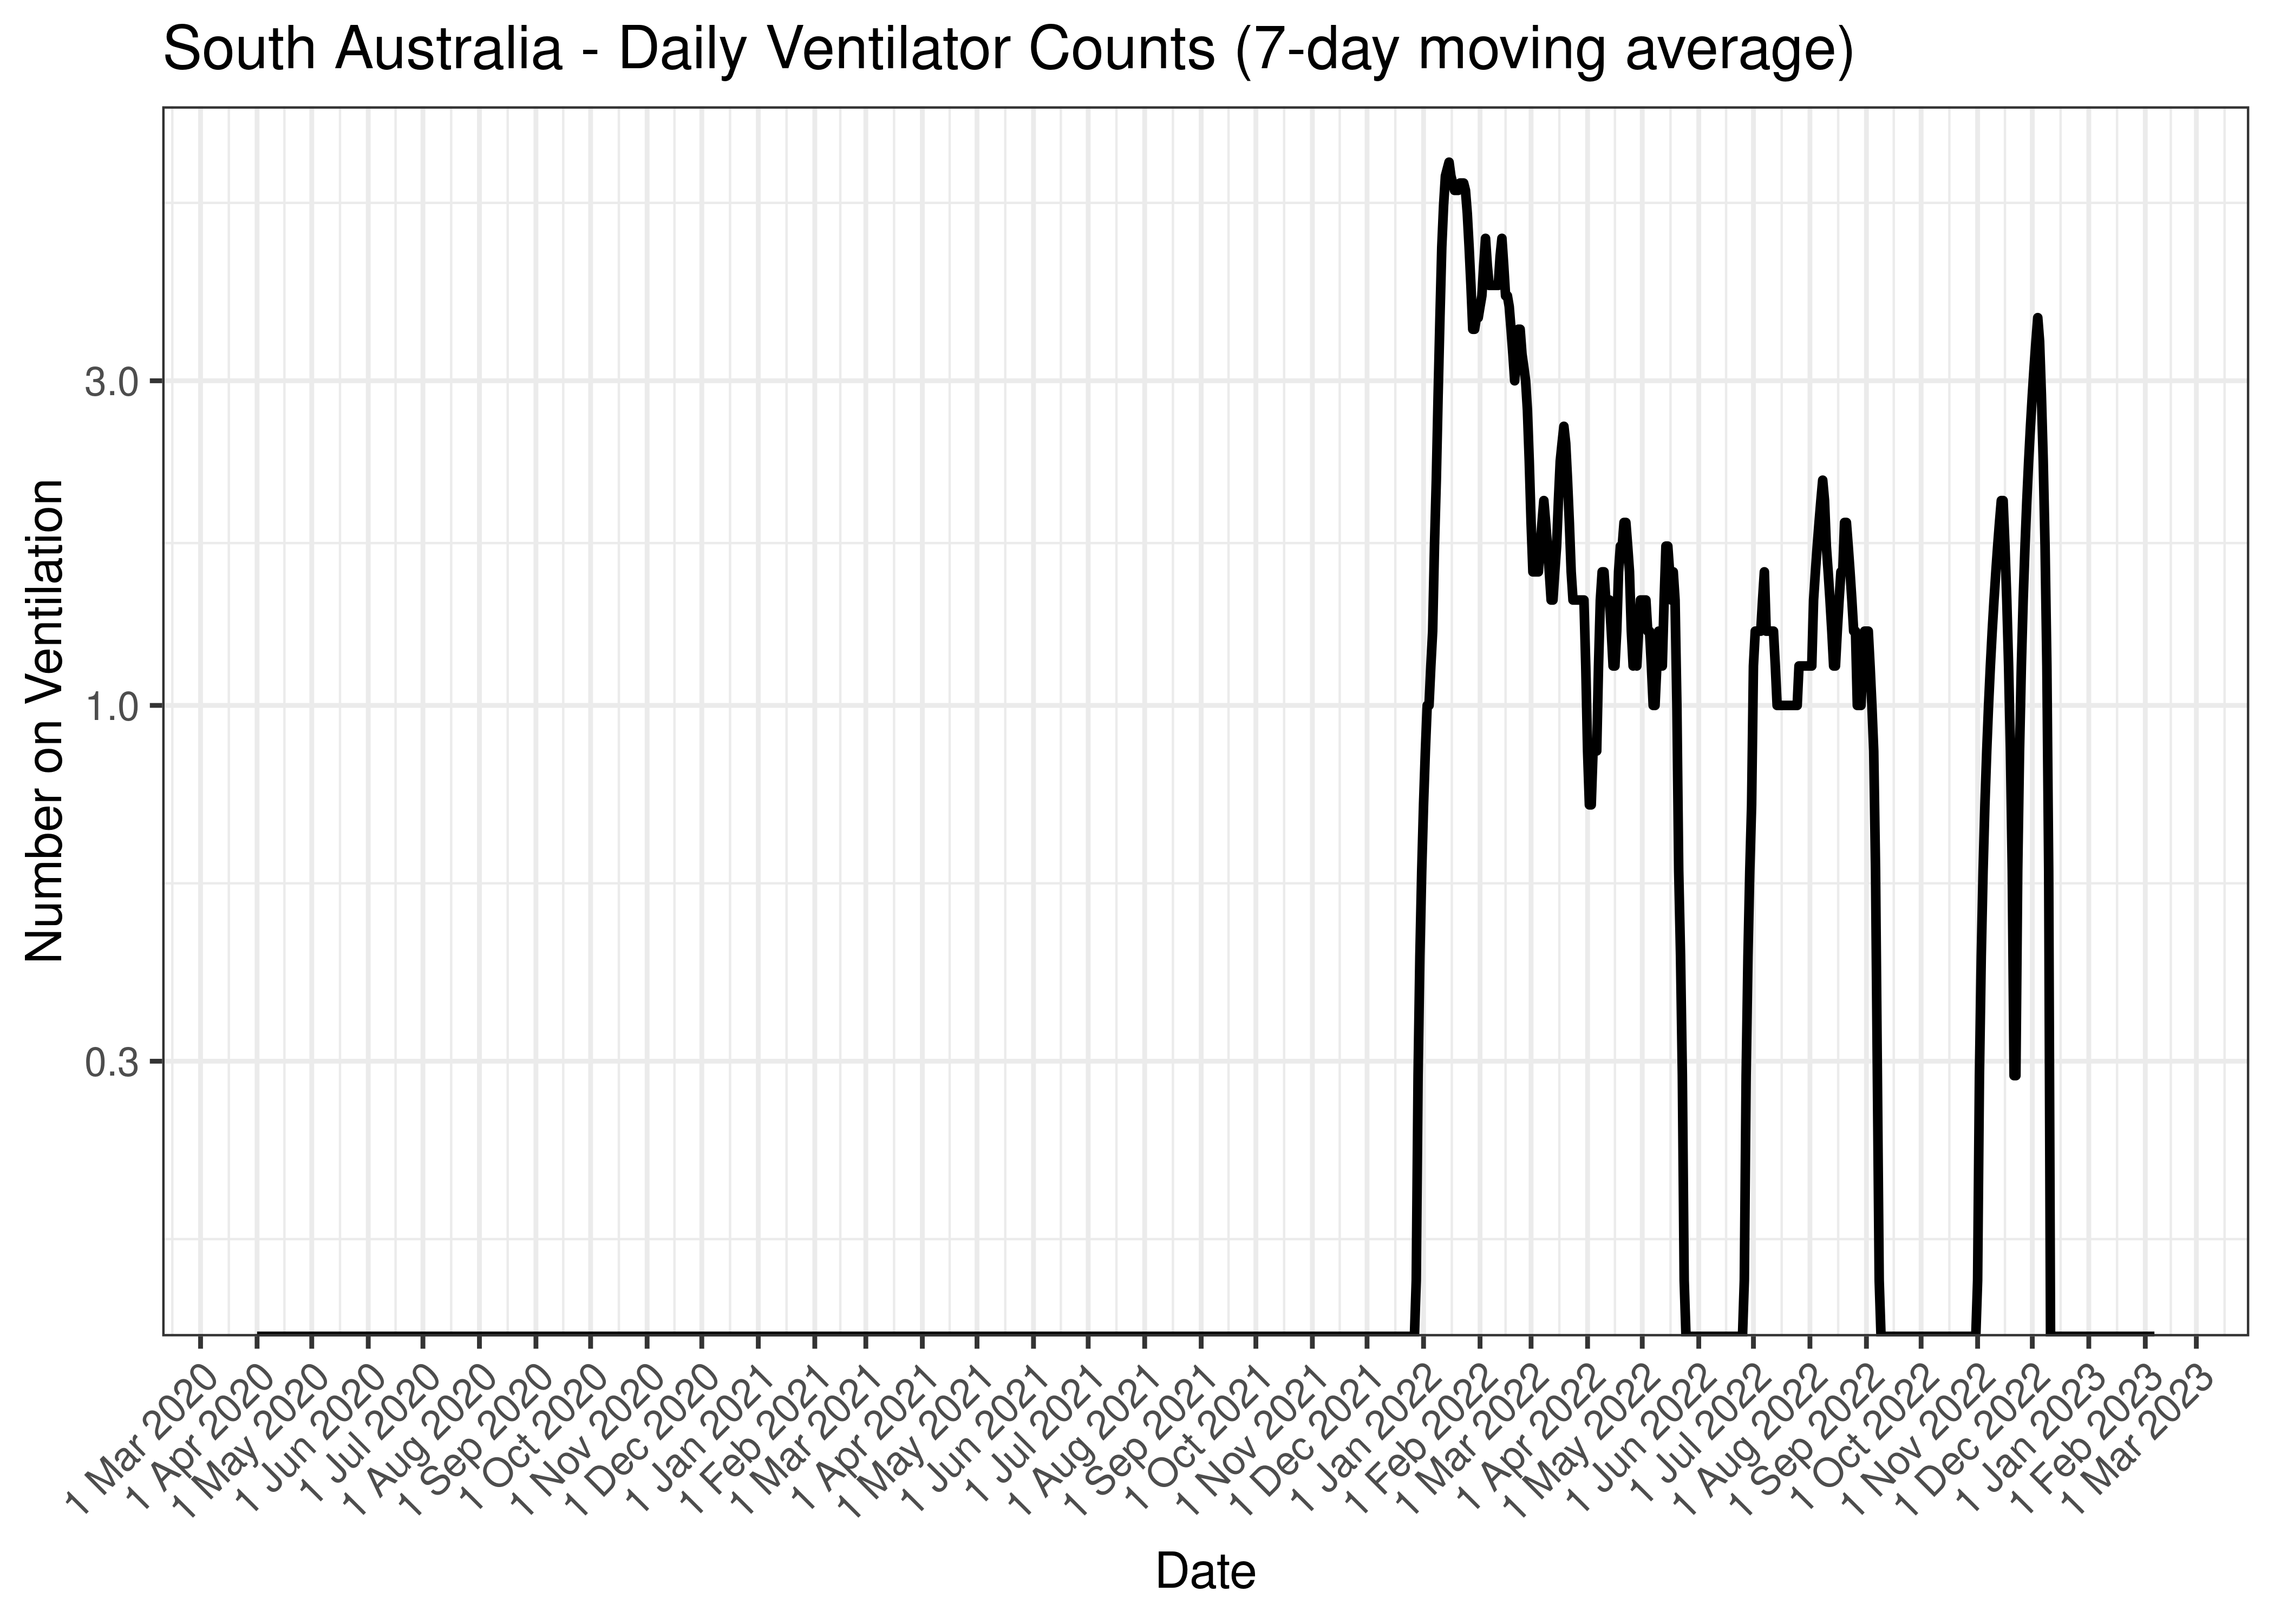 South Australia - Daily Ventilator Counts (7-day moving average)